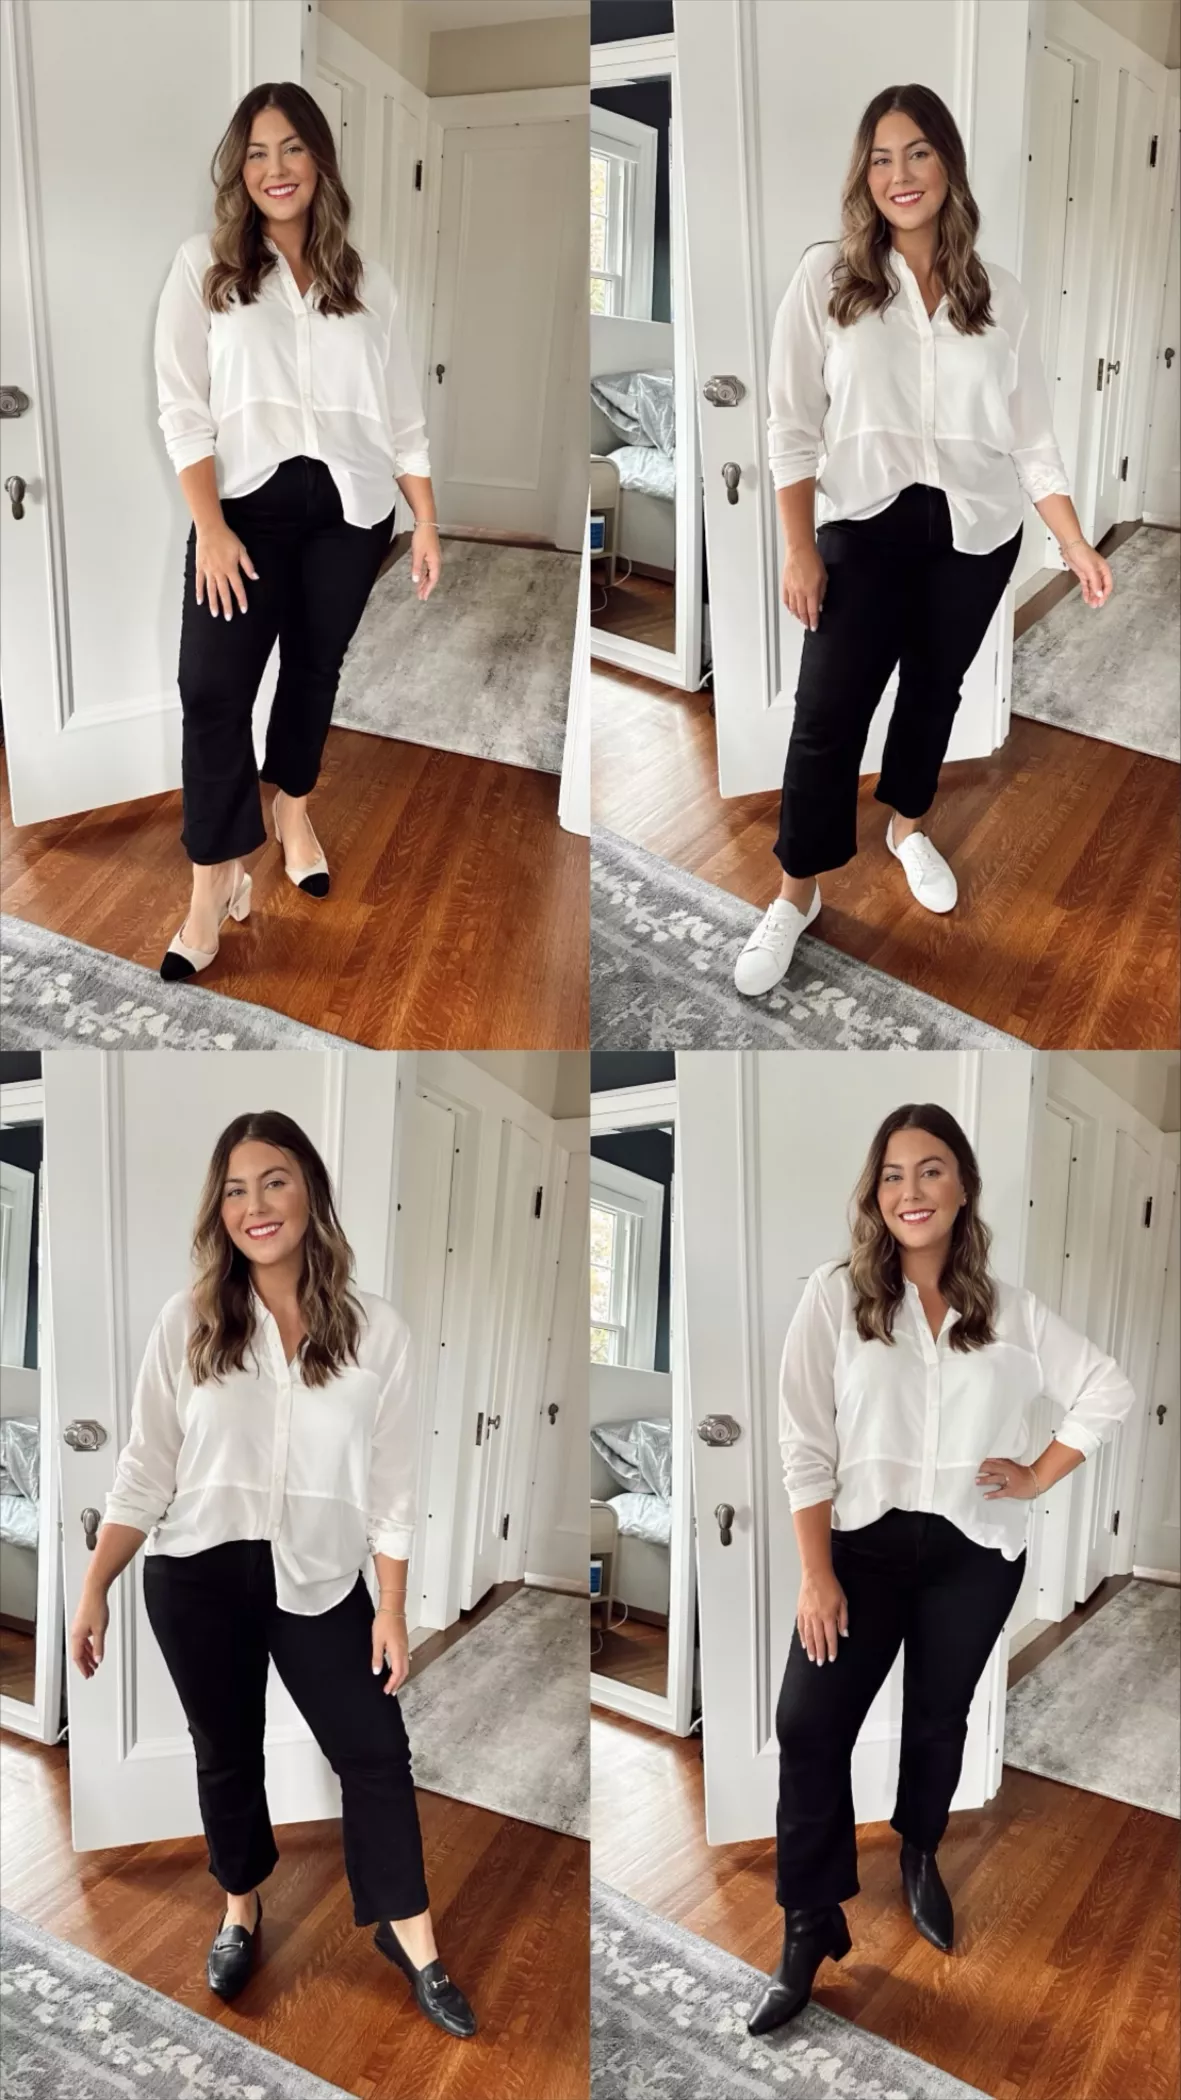 SPANX - Walking into our Fall wardrobe like Caralyn Mirand